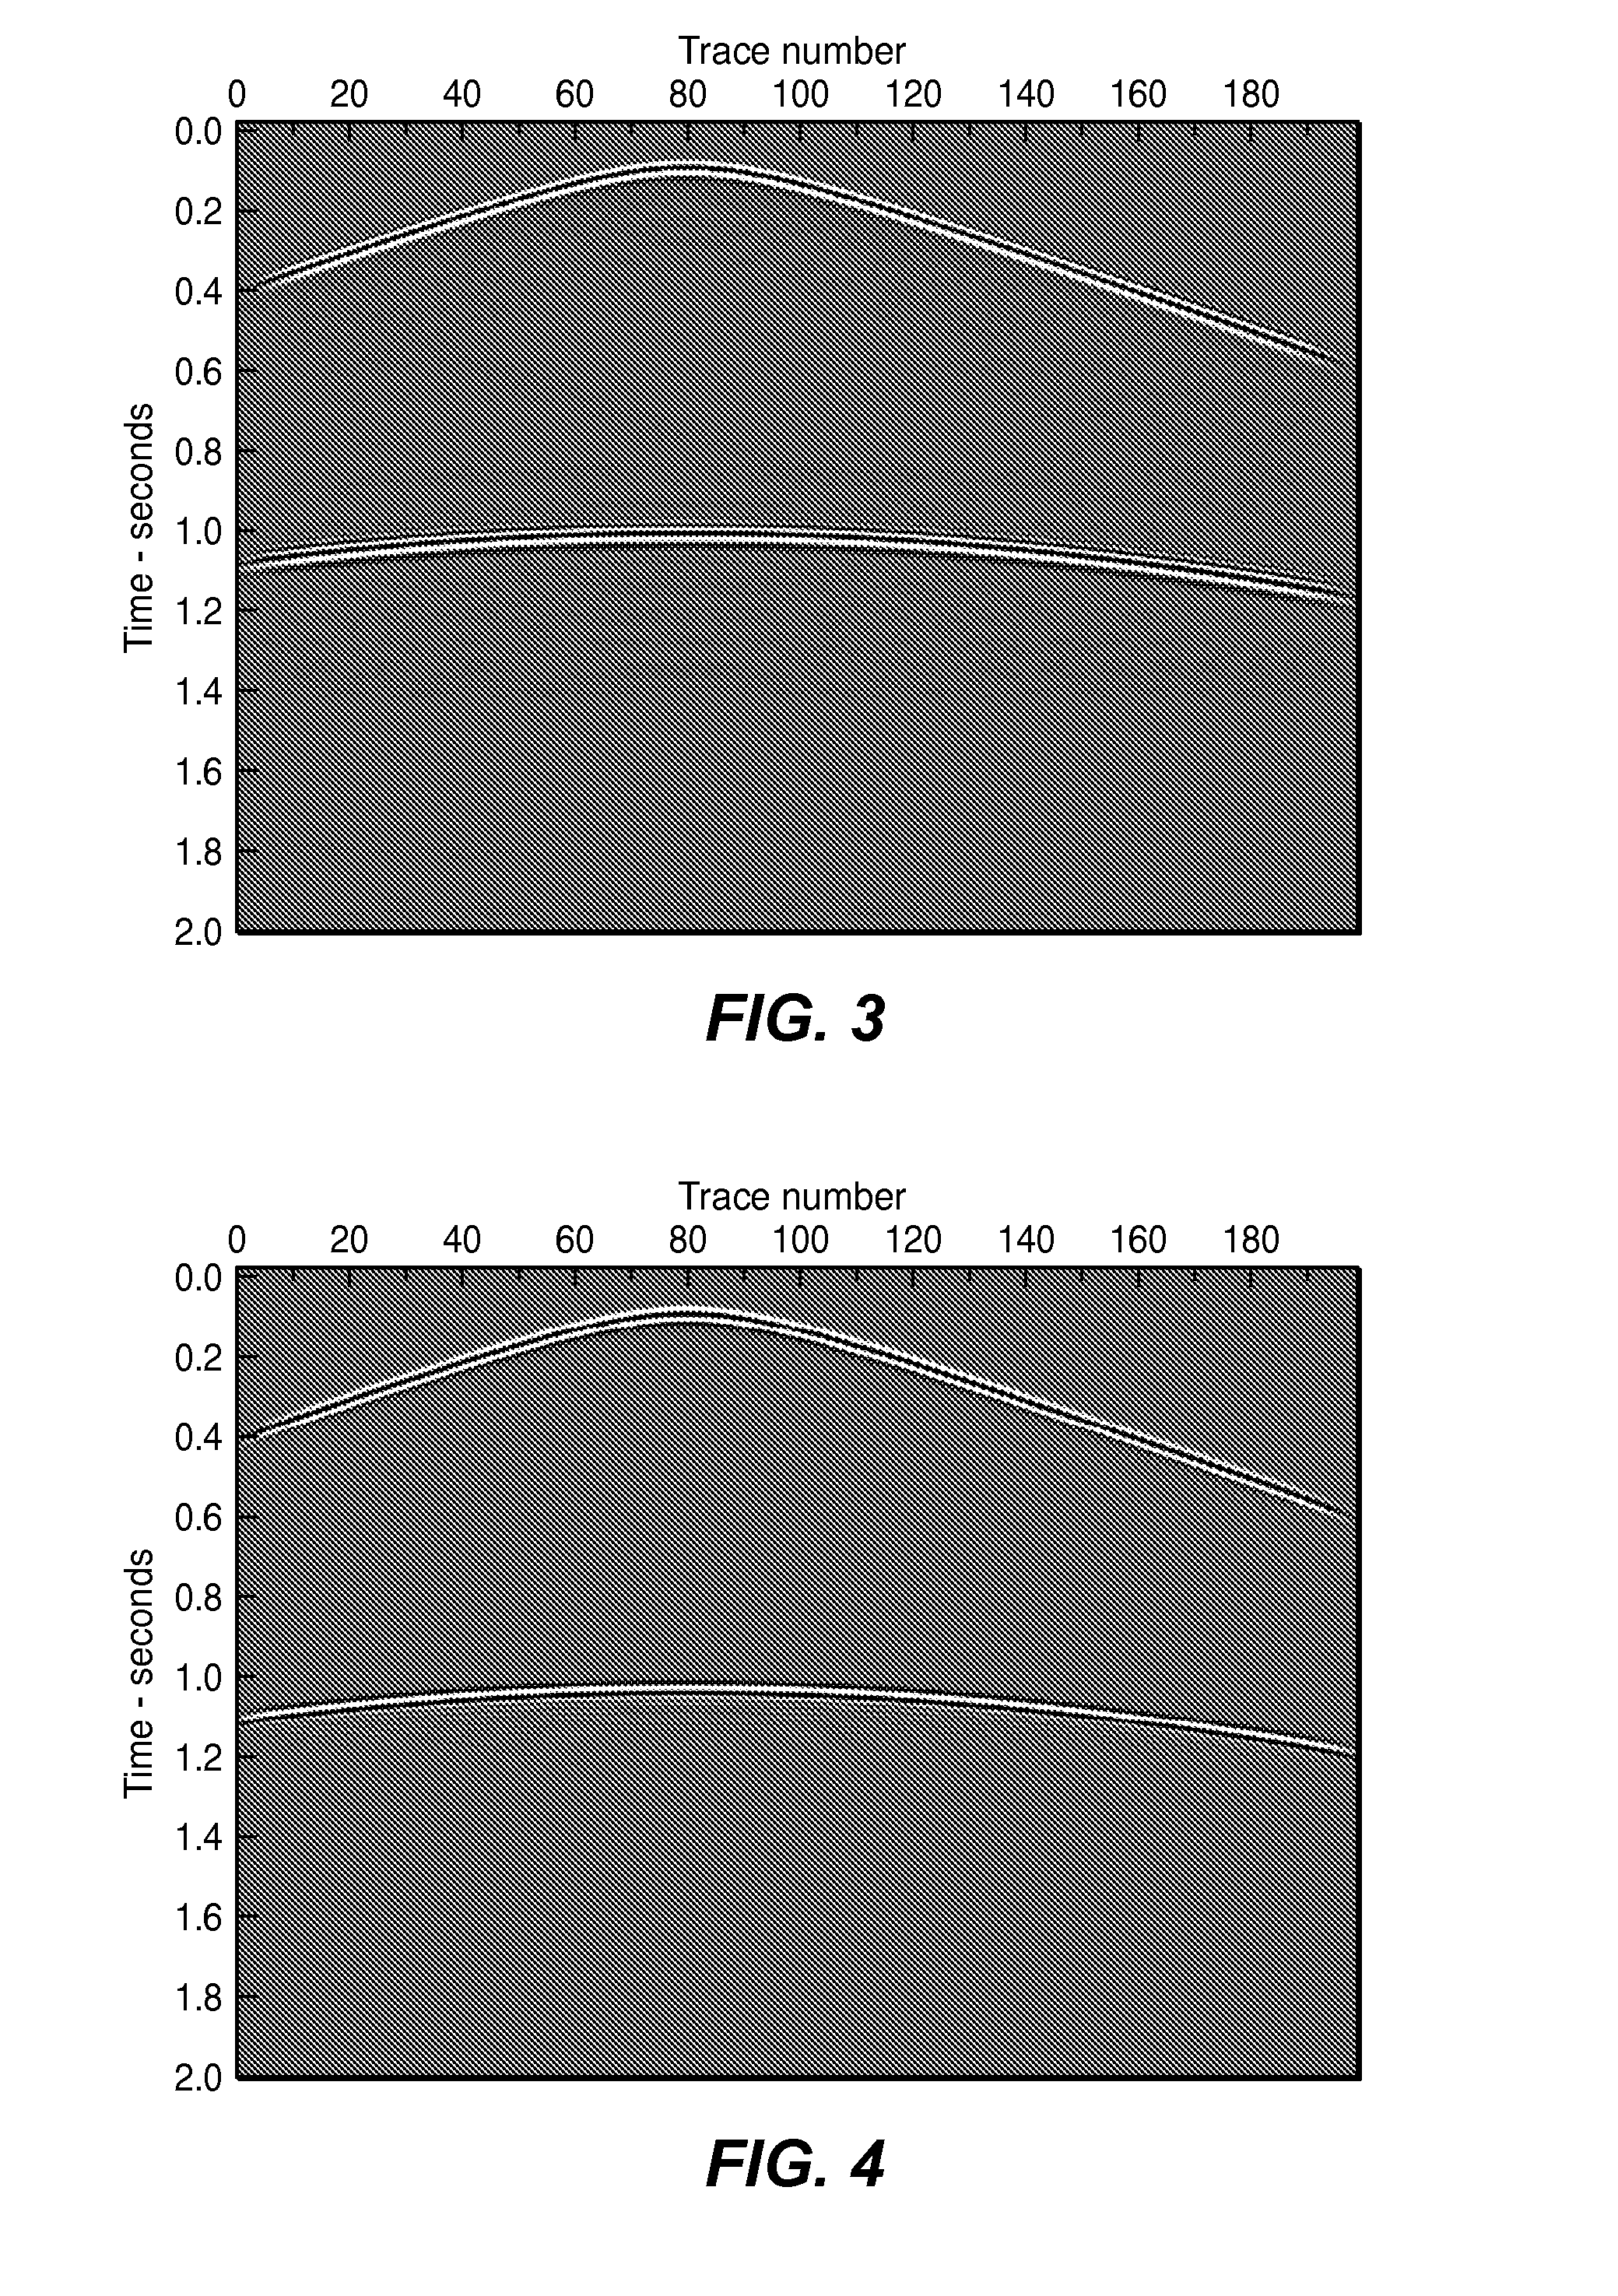 Method for Temporal Dispersion Correction for Seismic Simulation, RTM and FWI